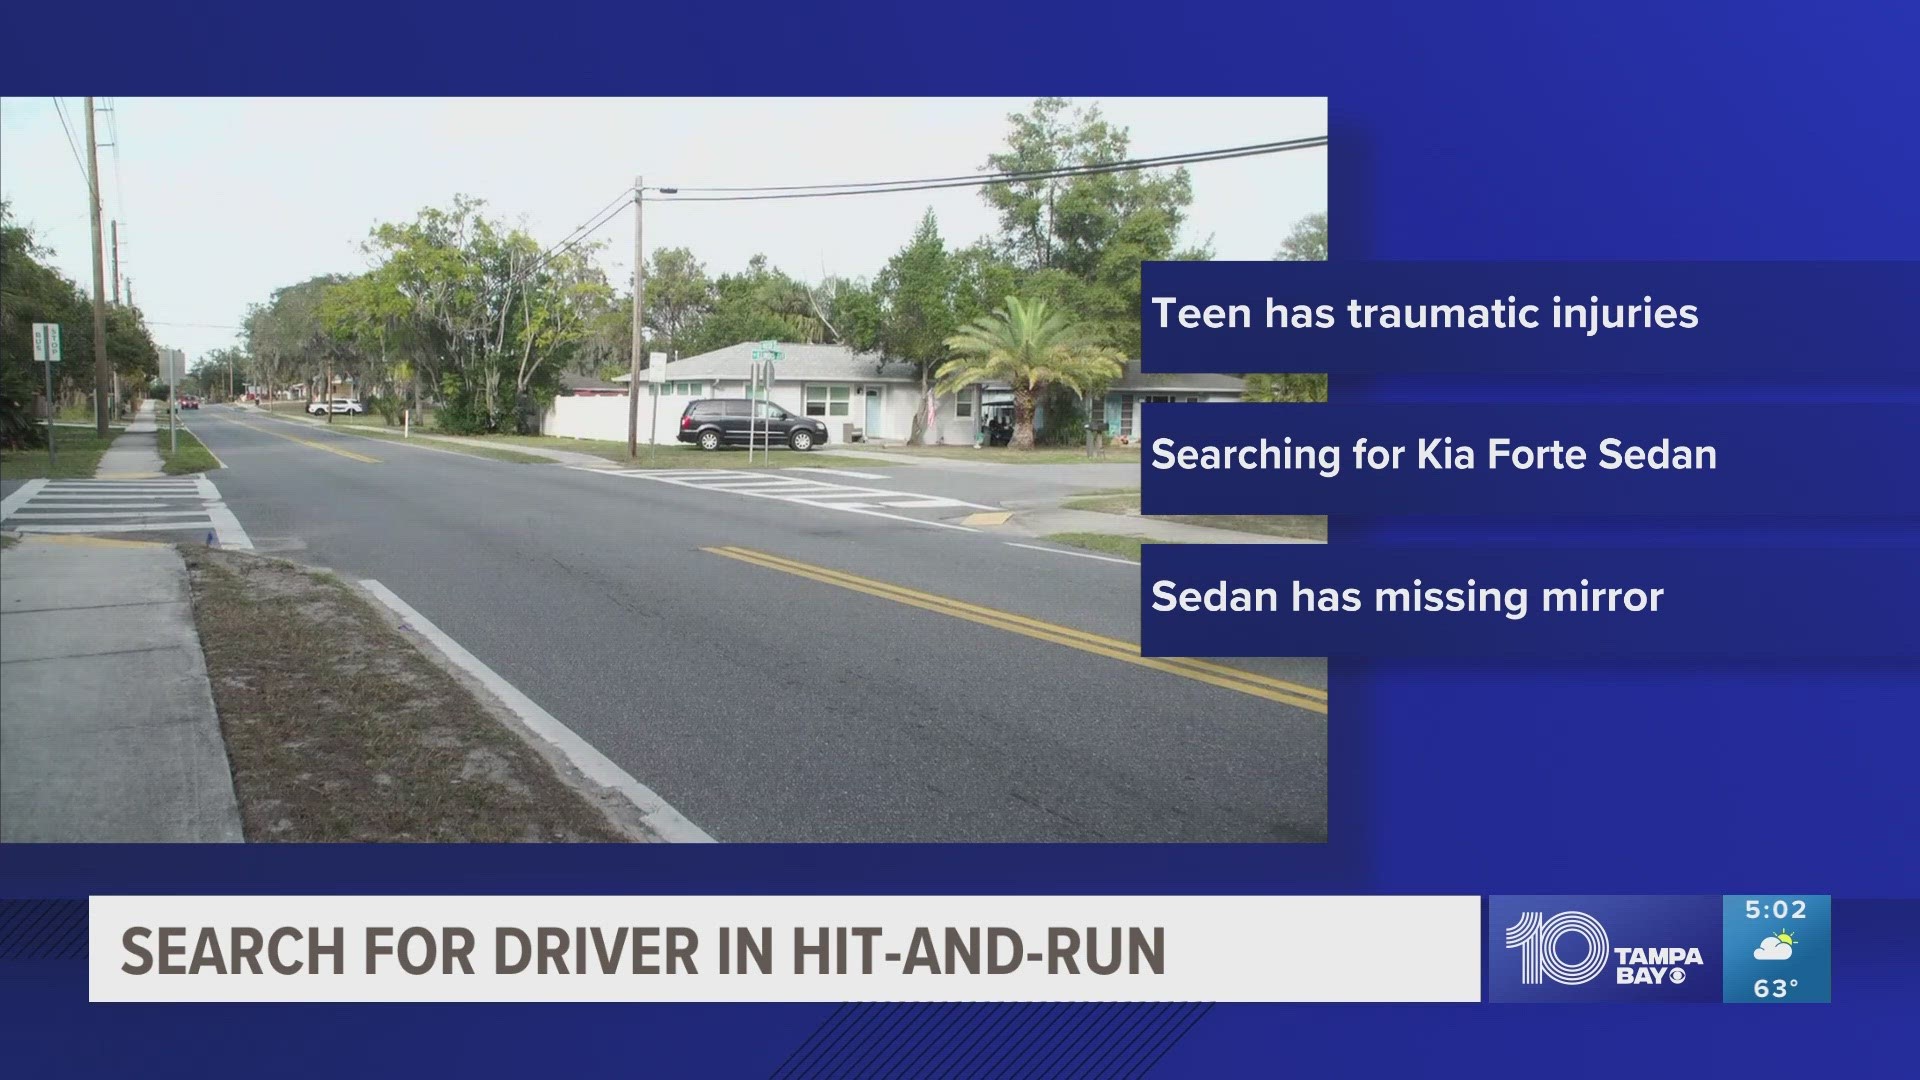 Investigators are now looking for a Kia Forte with a missing driver-side mirror.